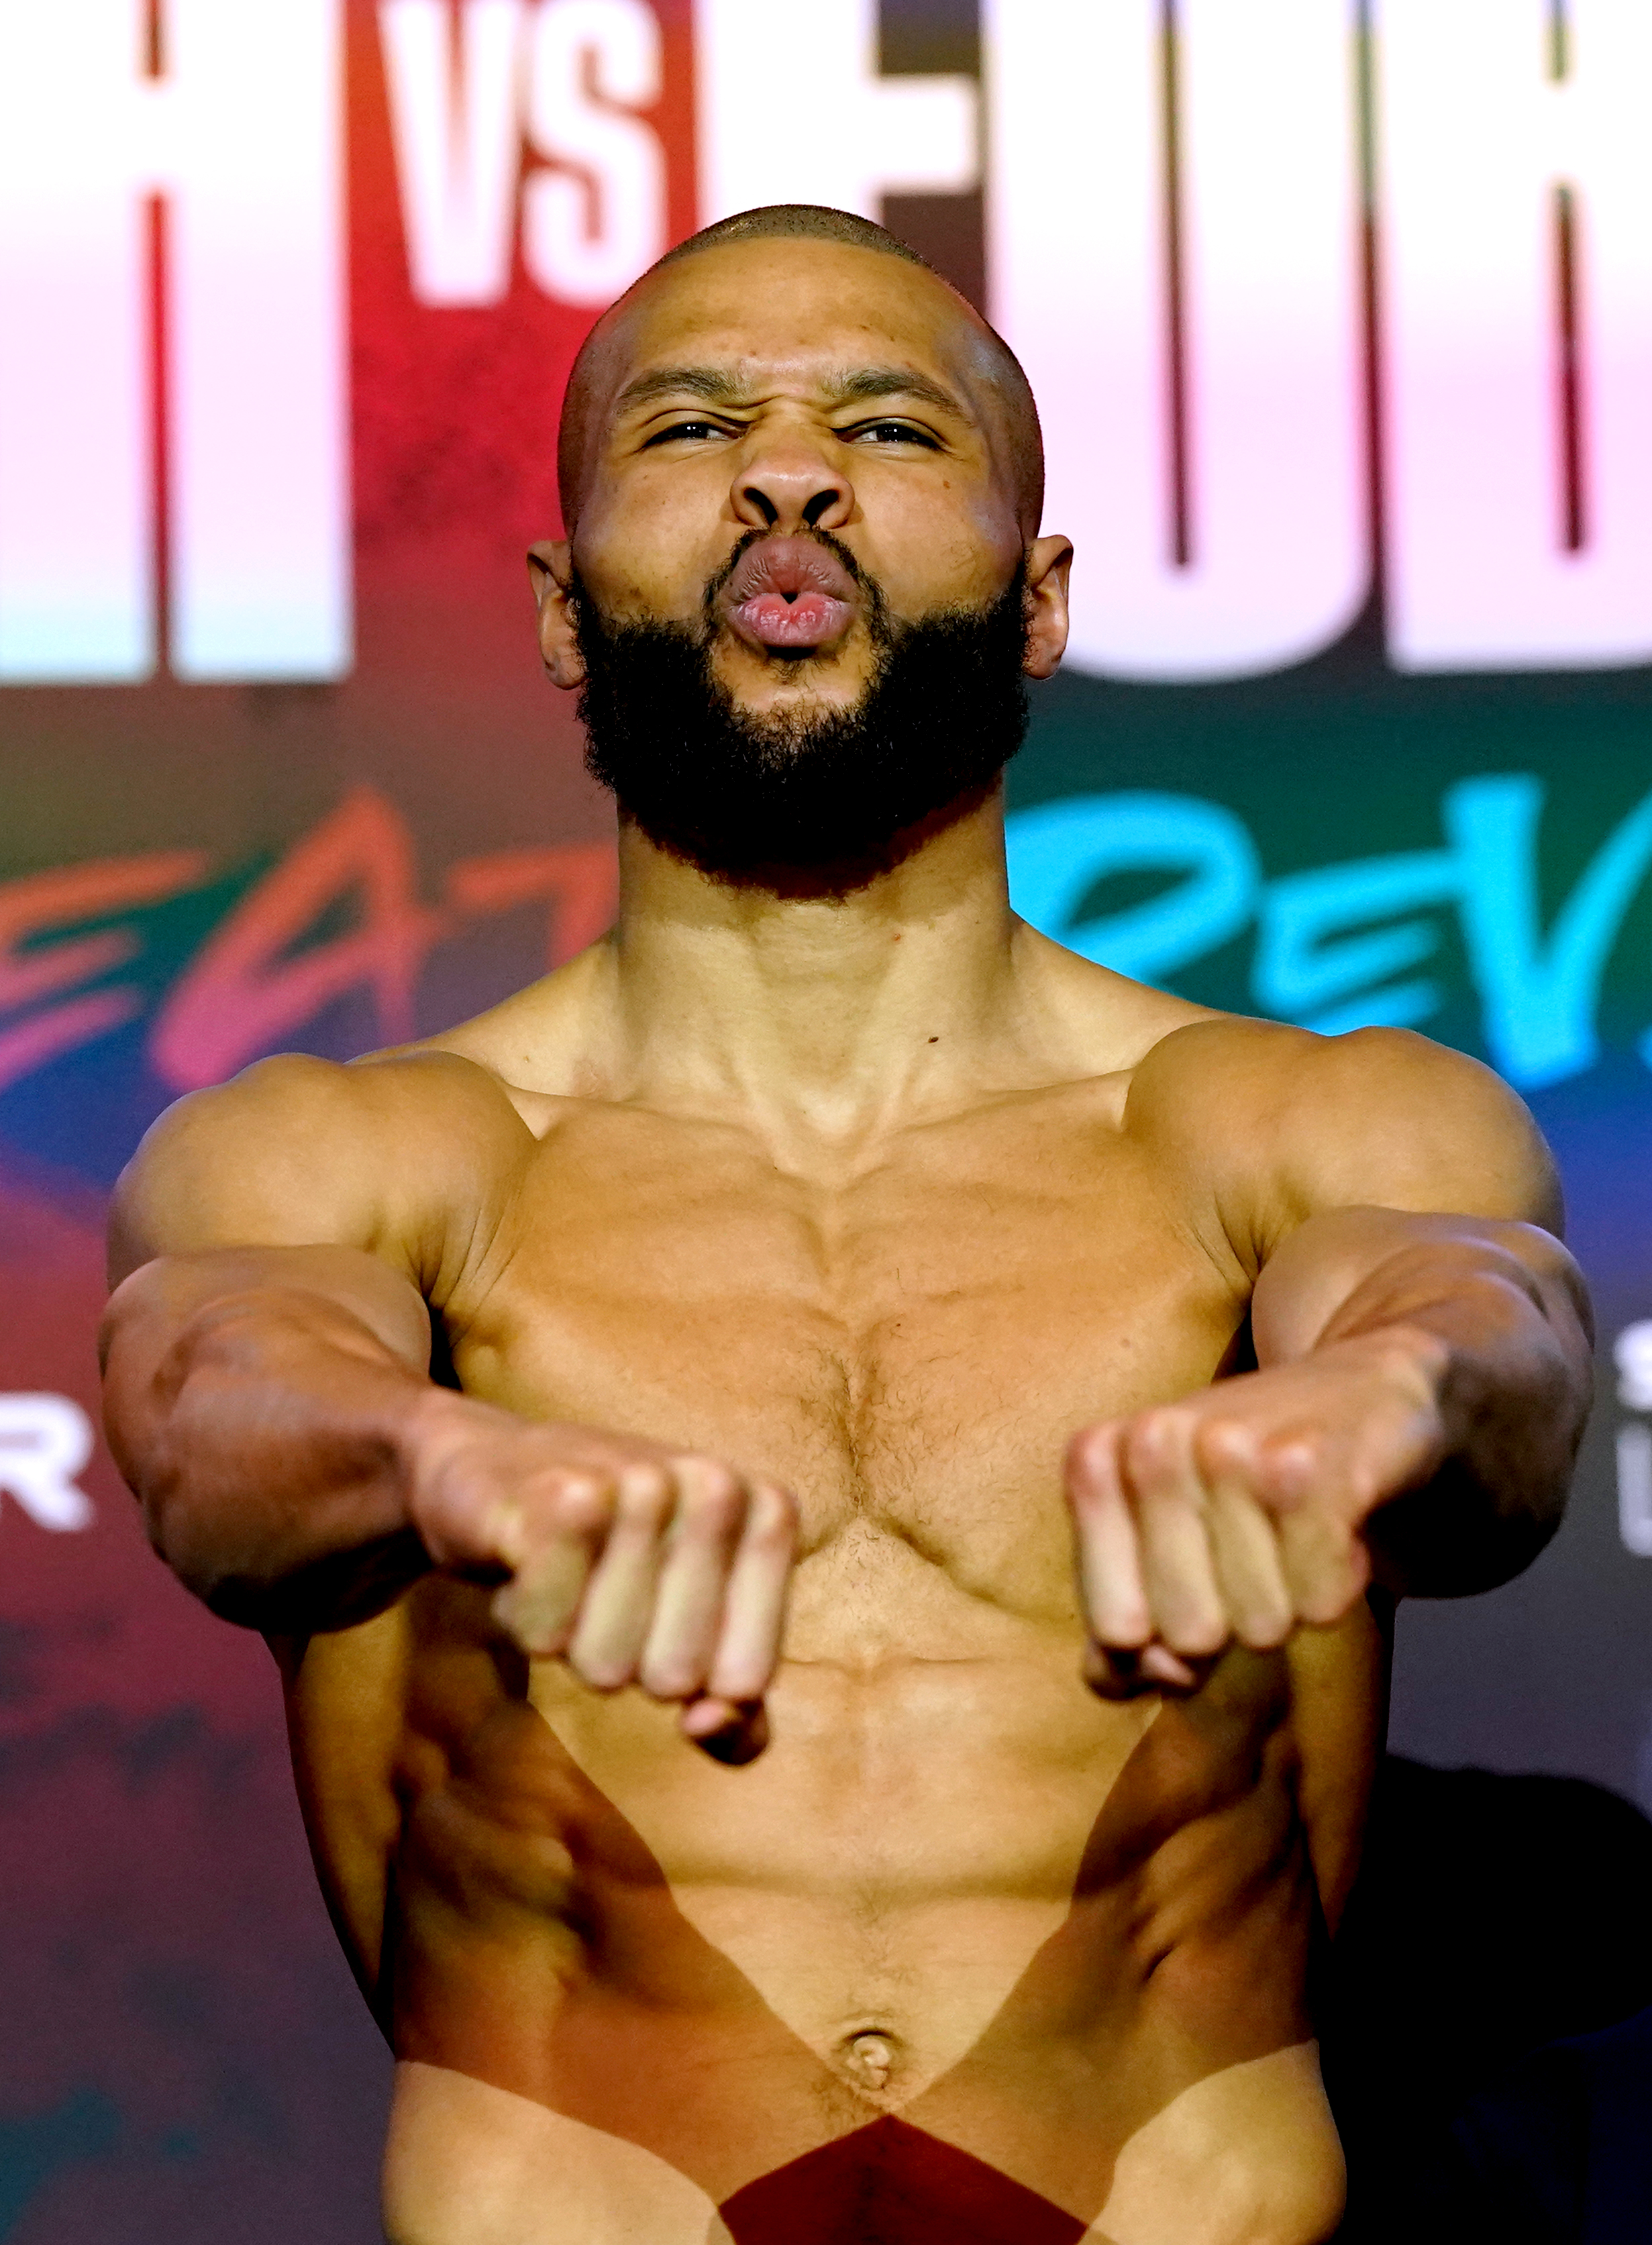 Chris Eubank Jr is making it clear that he’s still the boss despite hiring a knowledgeable team